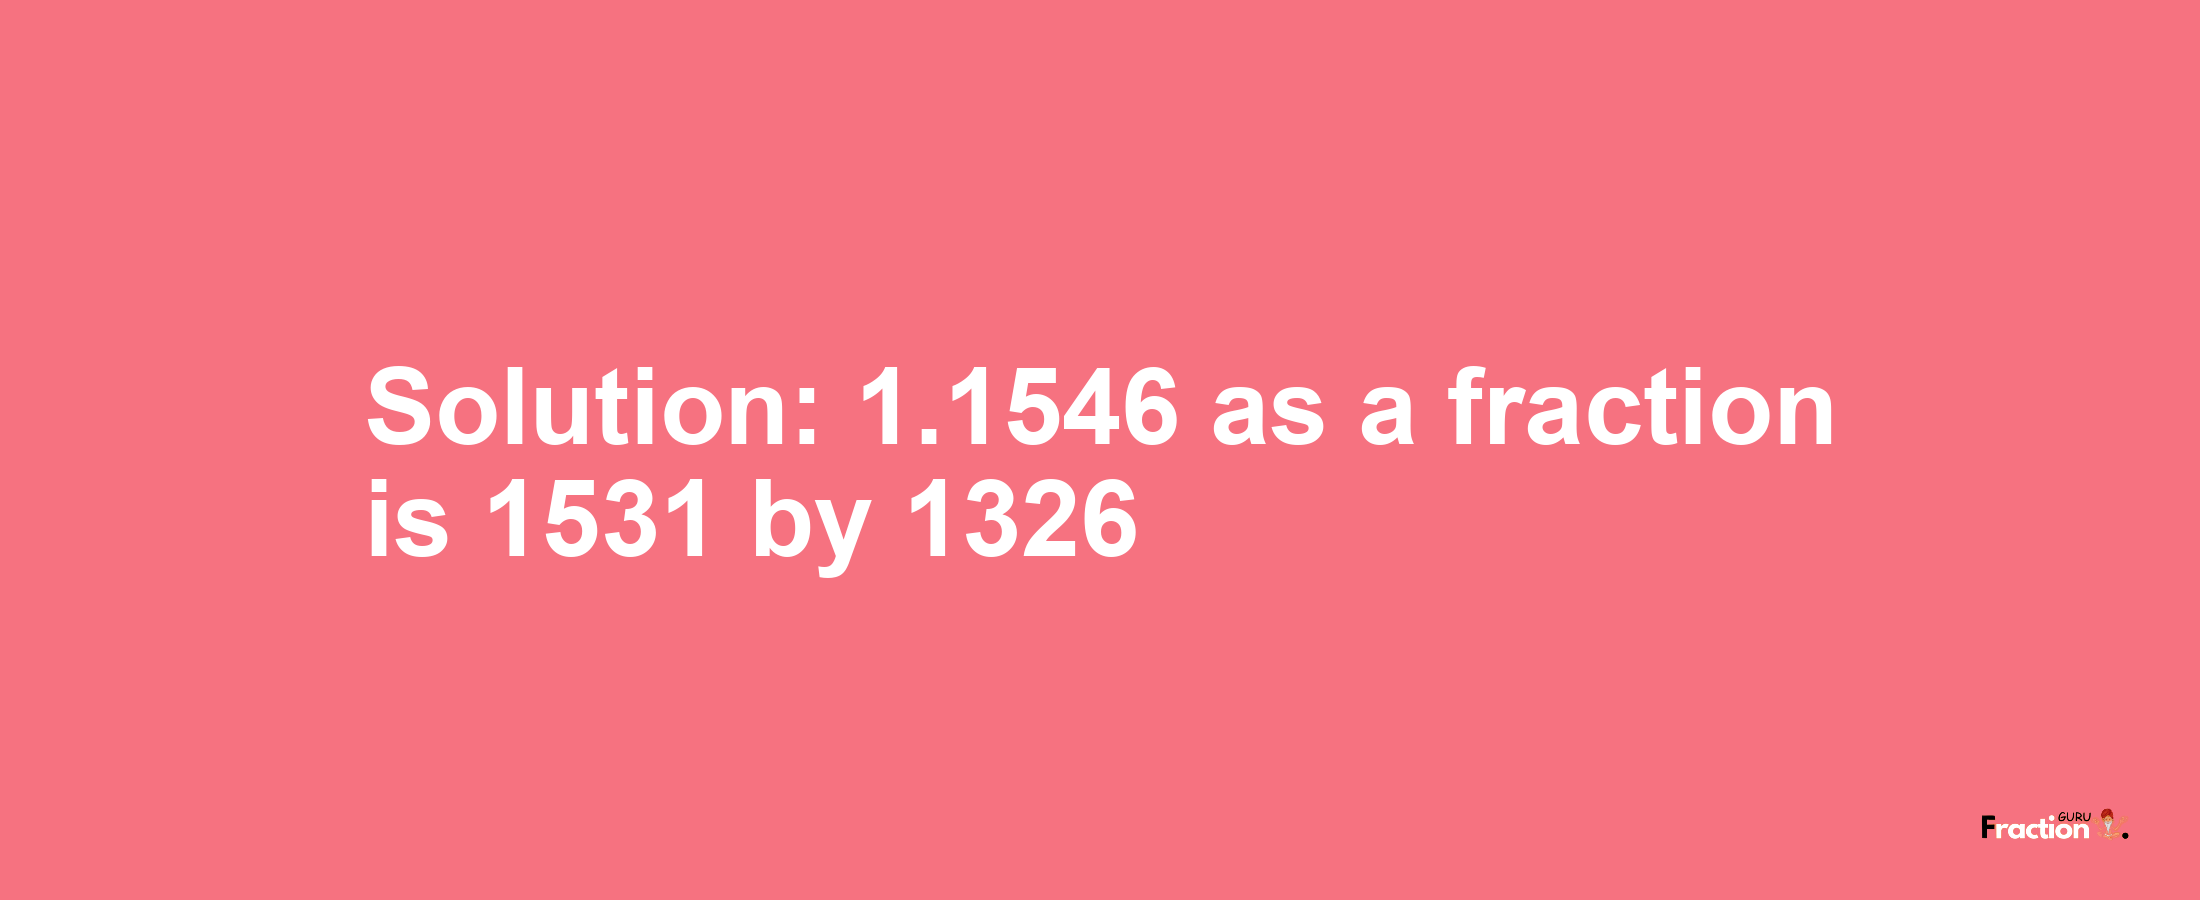 Solution:1.1546 as a fraction is 1531/1326